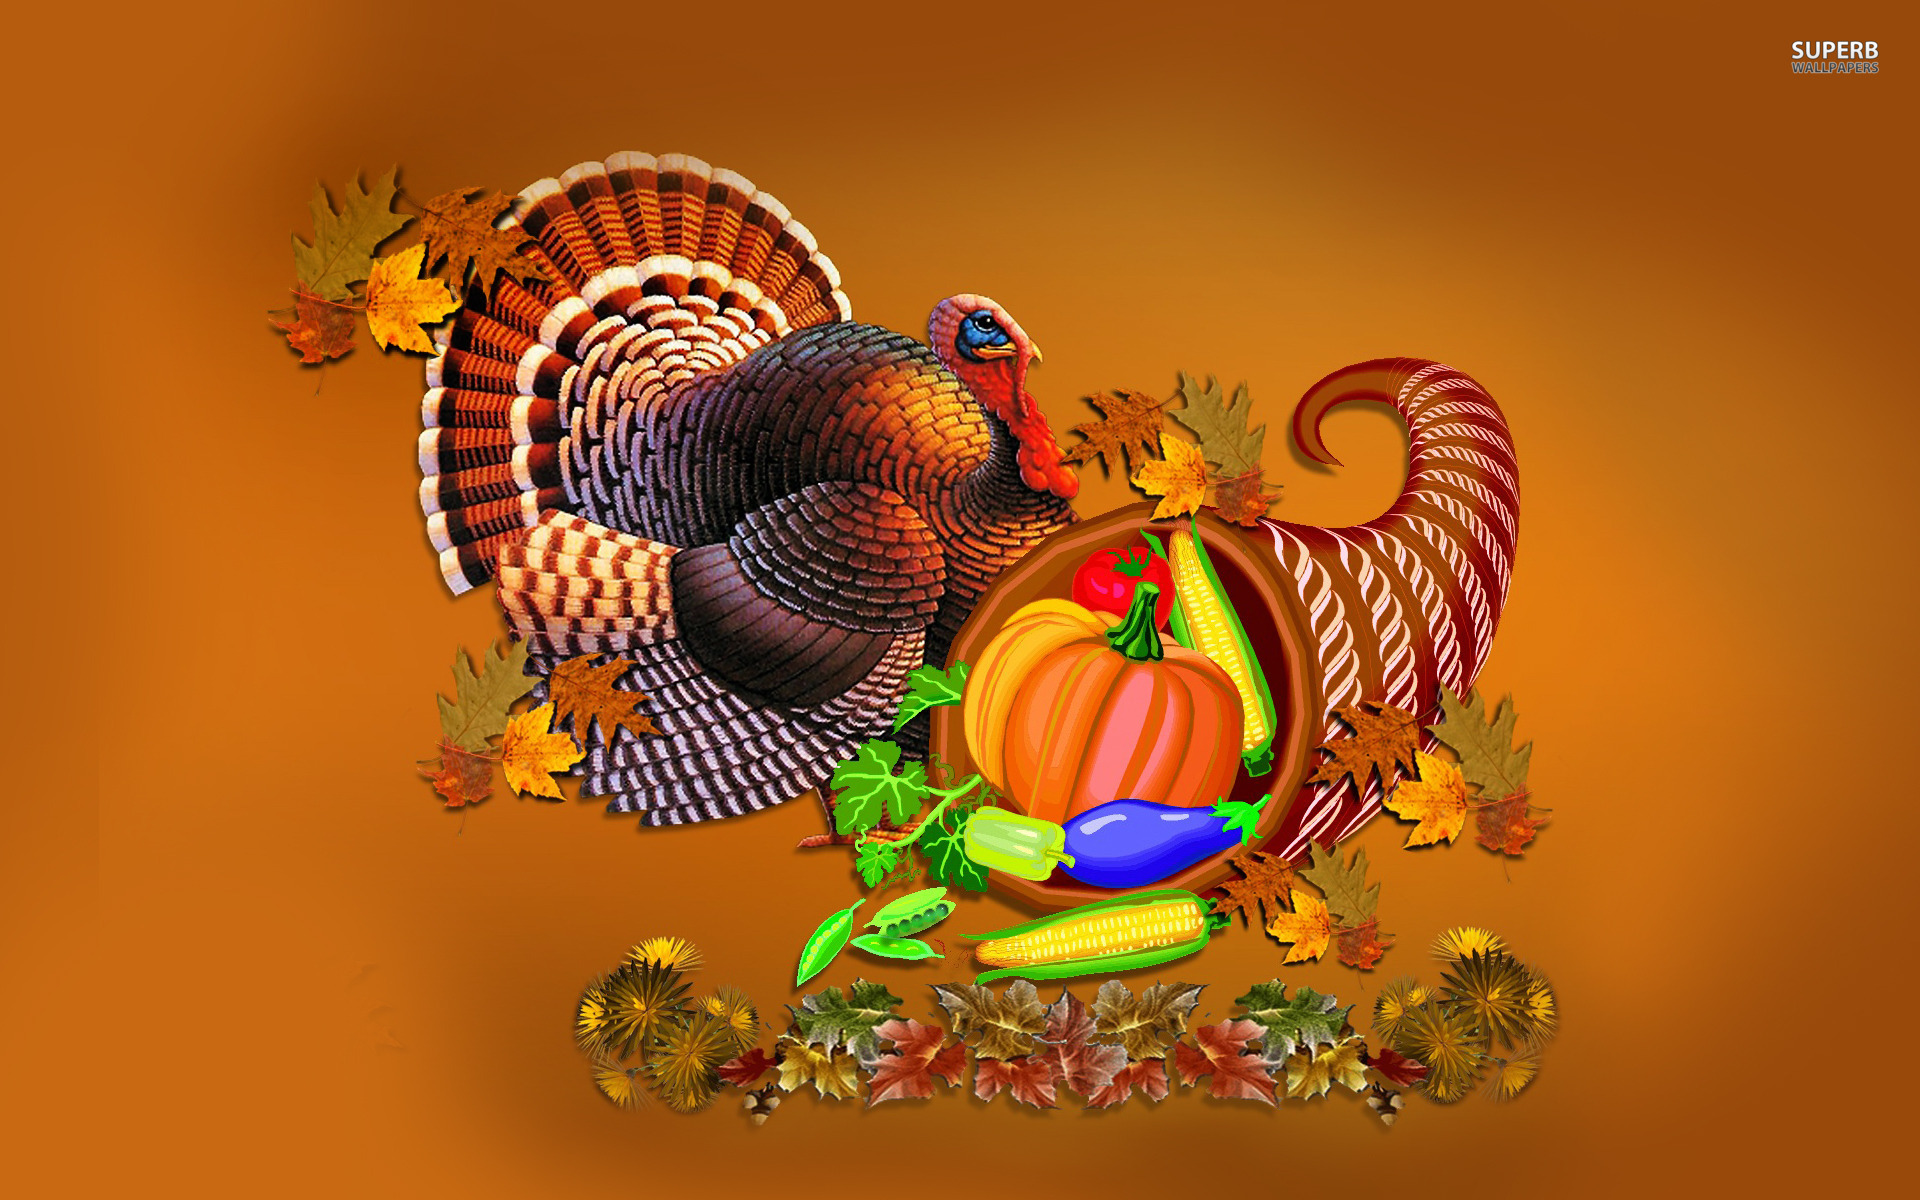  Wallpaper Tuesday Great Collection of HD Thanksgiving Wallpapers